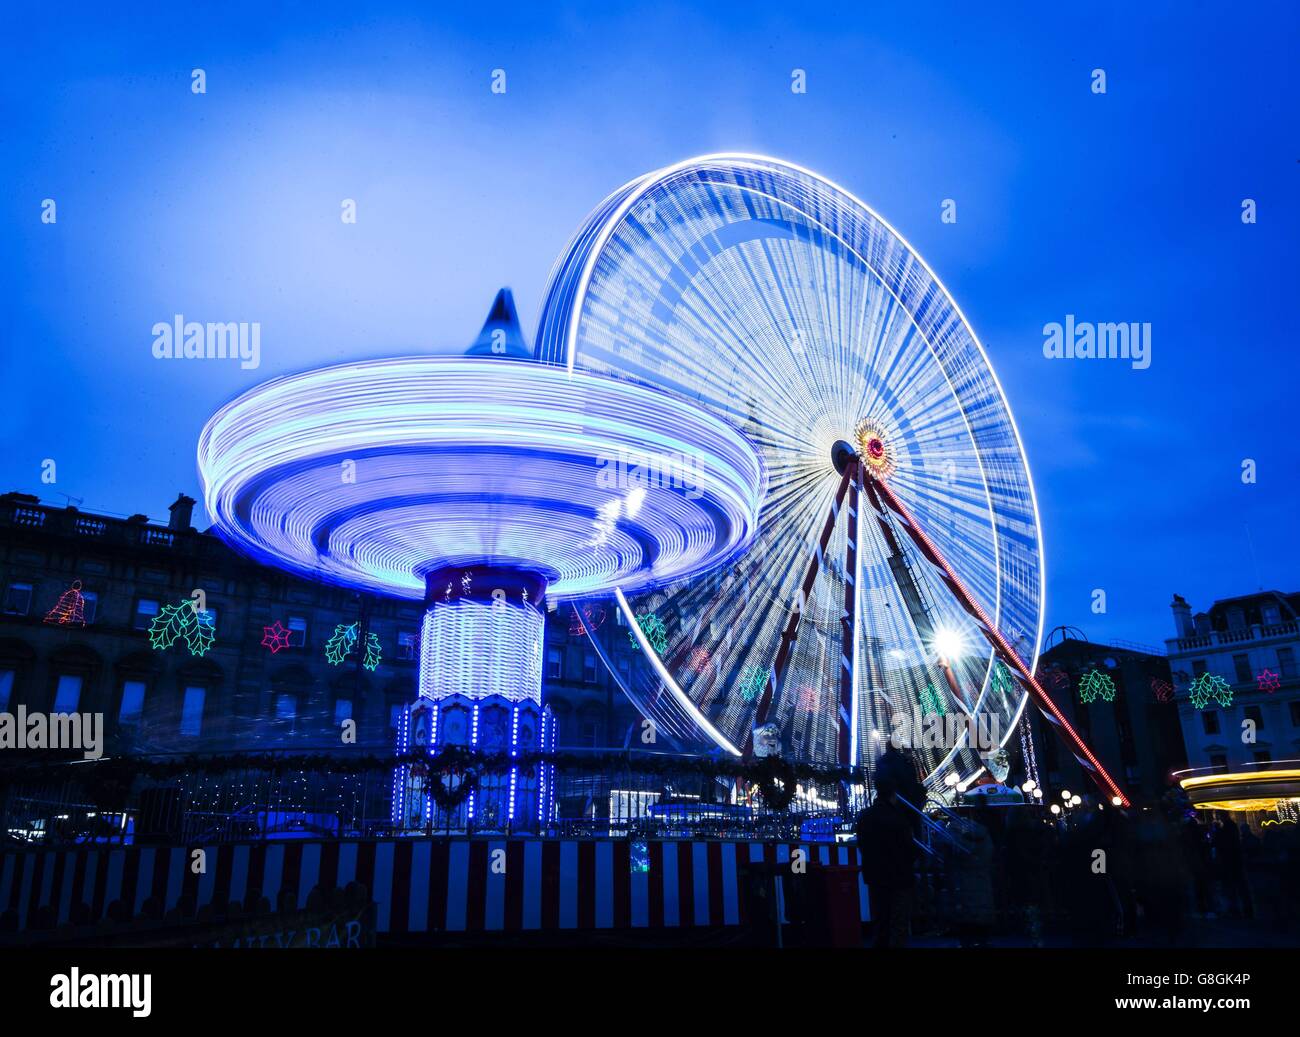 Editors please note, Long exposure photograph using tungsten white balance in daylight conditions. Fairground rides in George Square, Glasgow, as revelers enjoy the Christmas and New Year holidays. Stock Photo